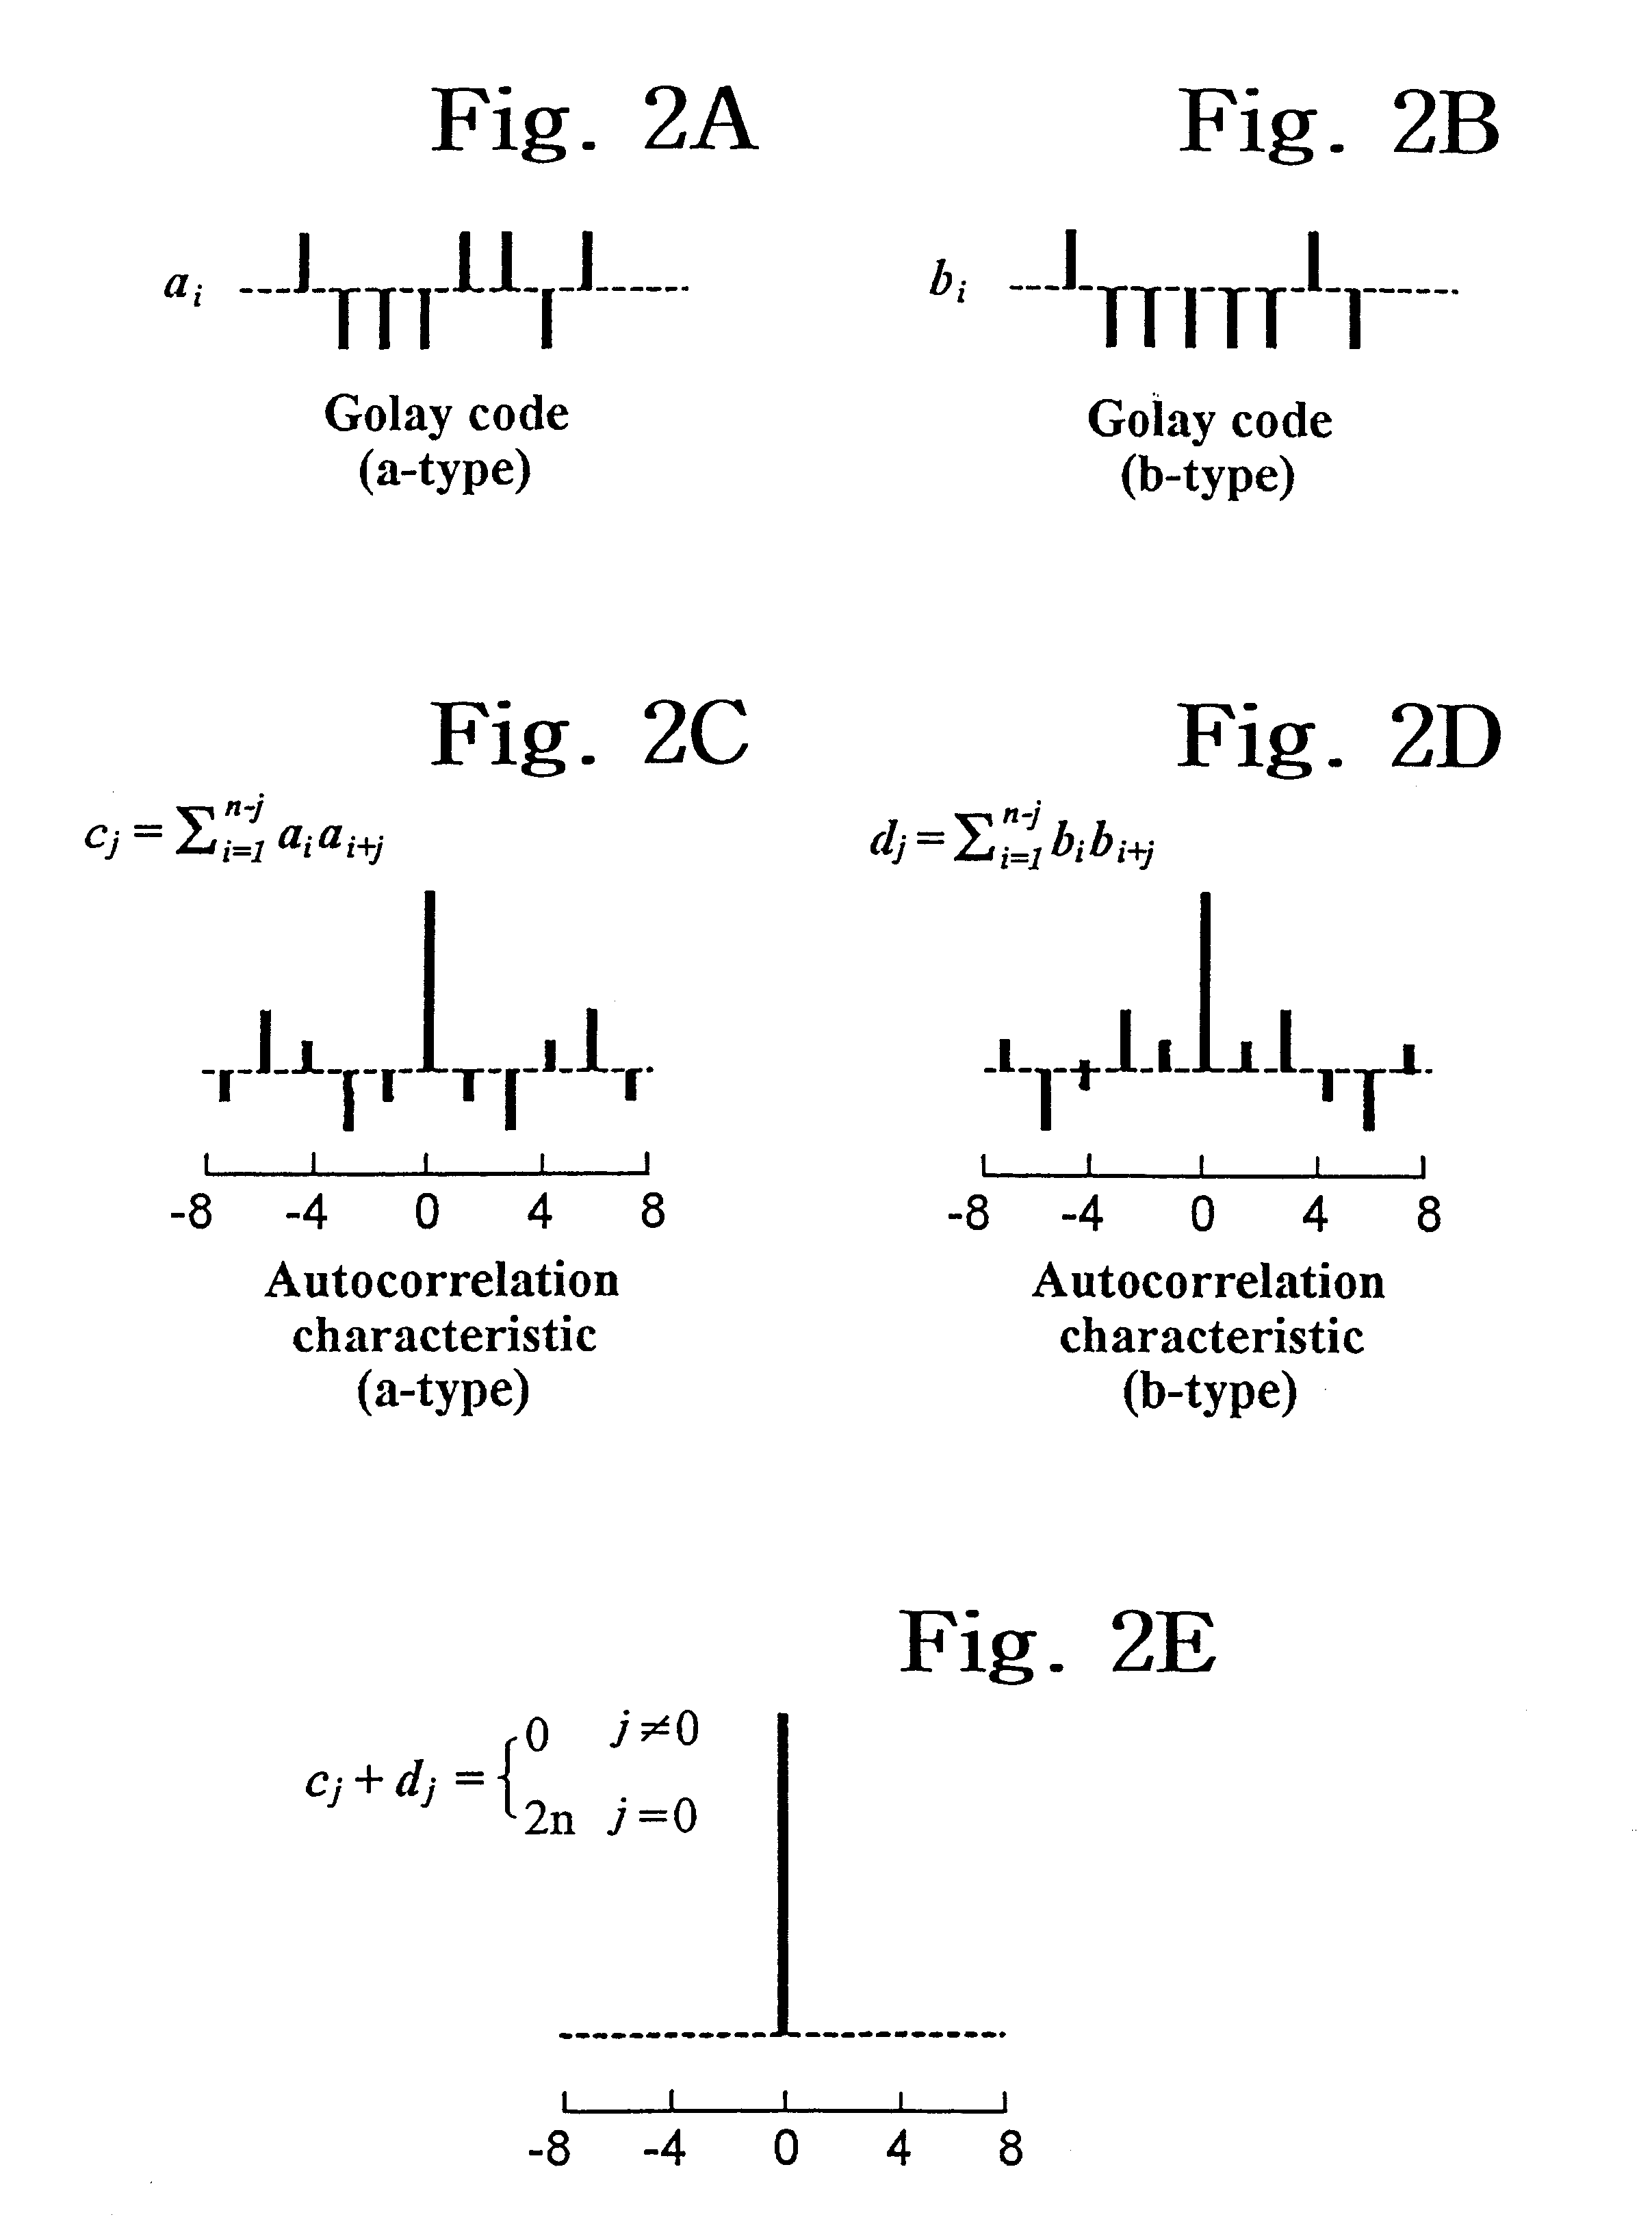 Ultrasound imaging method and apparatus based on pulse compression technique using modified golay codes